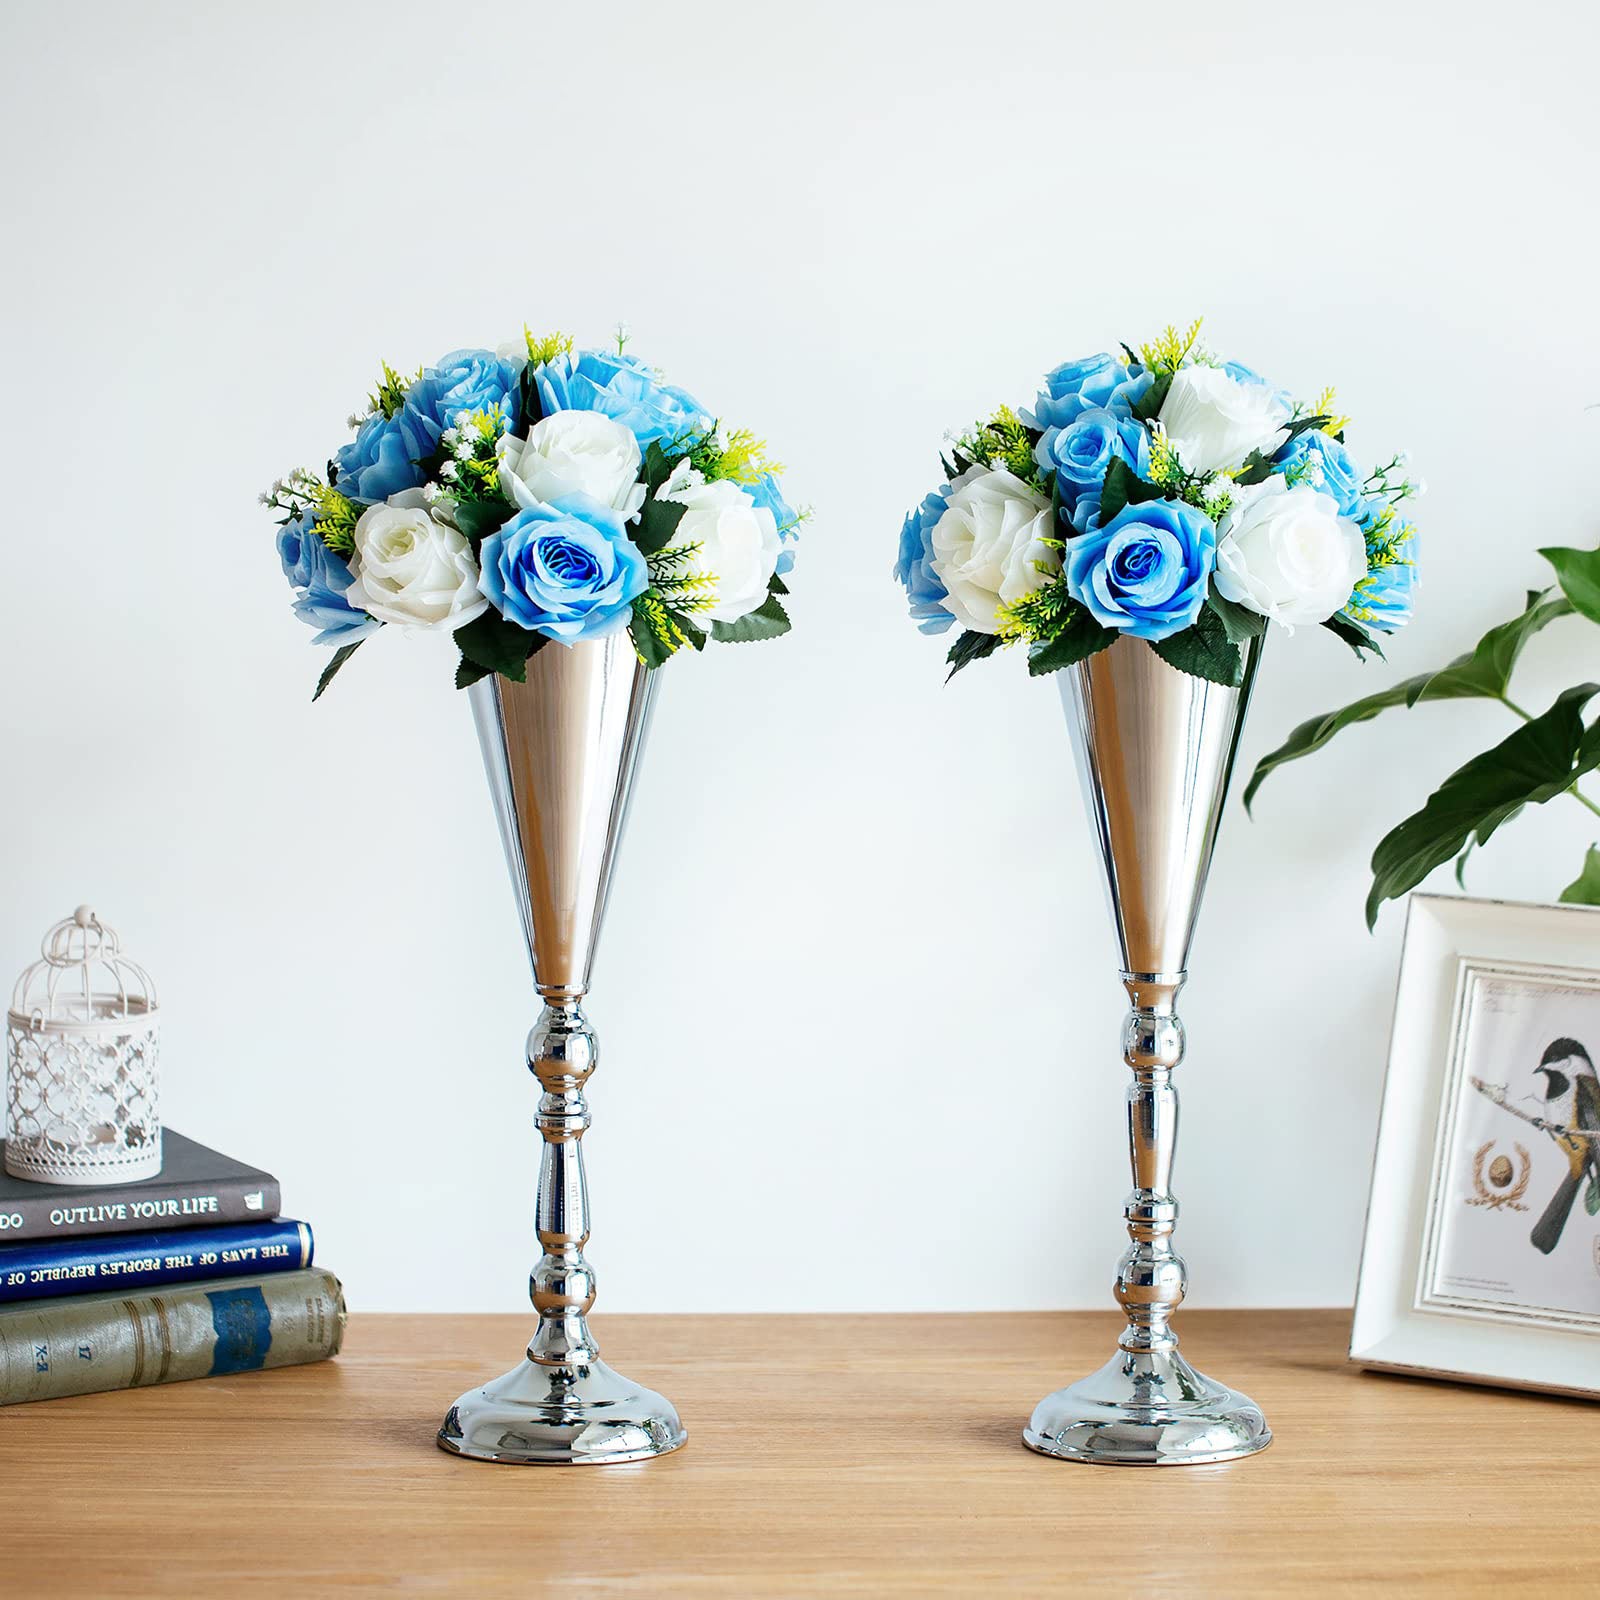 Tabletop Metal Wedding Flower Vase Table Decorative Centerpiece(Artificial flower are not included.)